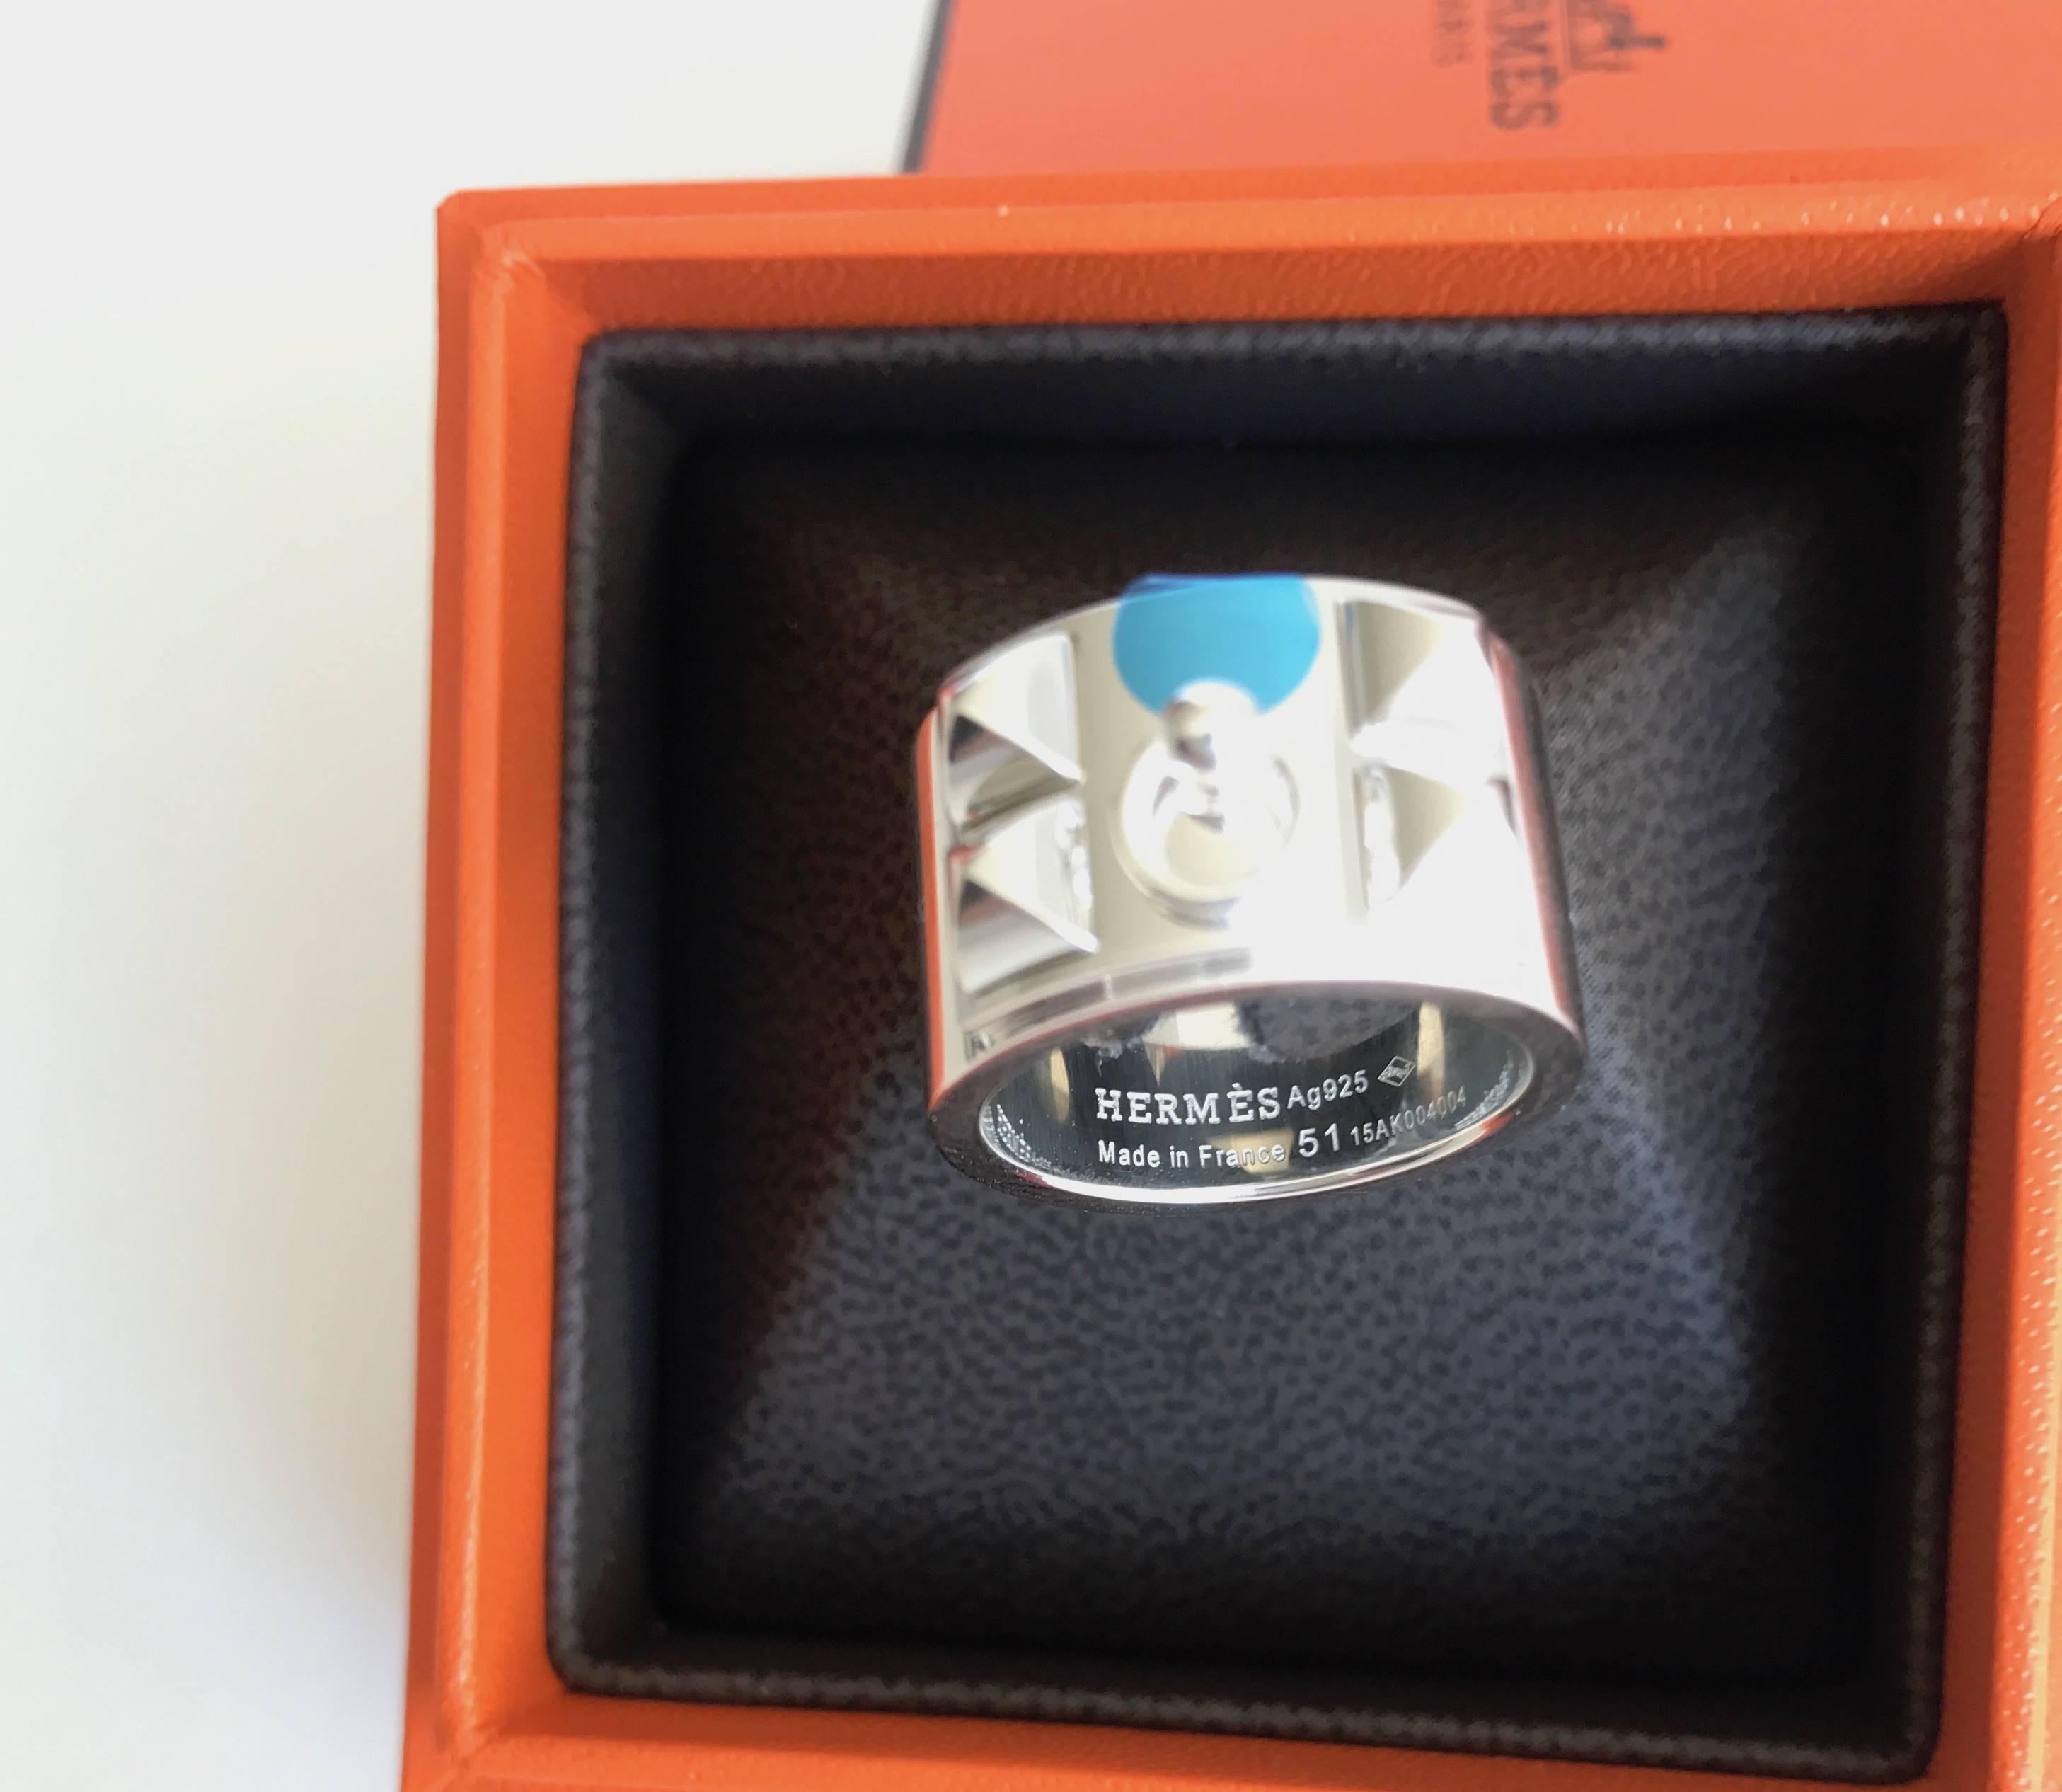 Brand new Hermes Collier de Chien Ring
Sterling Silver
Size 51
The Collier de Chien was originally designed as a collar to protect hunting dogs. Decidedly too beautiful to be reserved solely for our animal friends, the Collier de Chien eventually